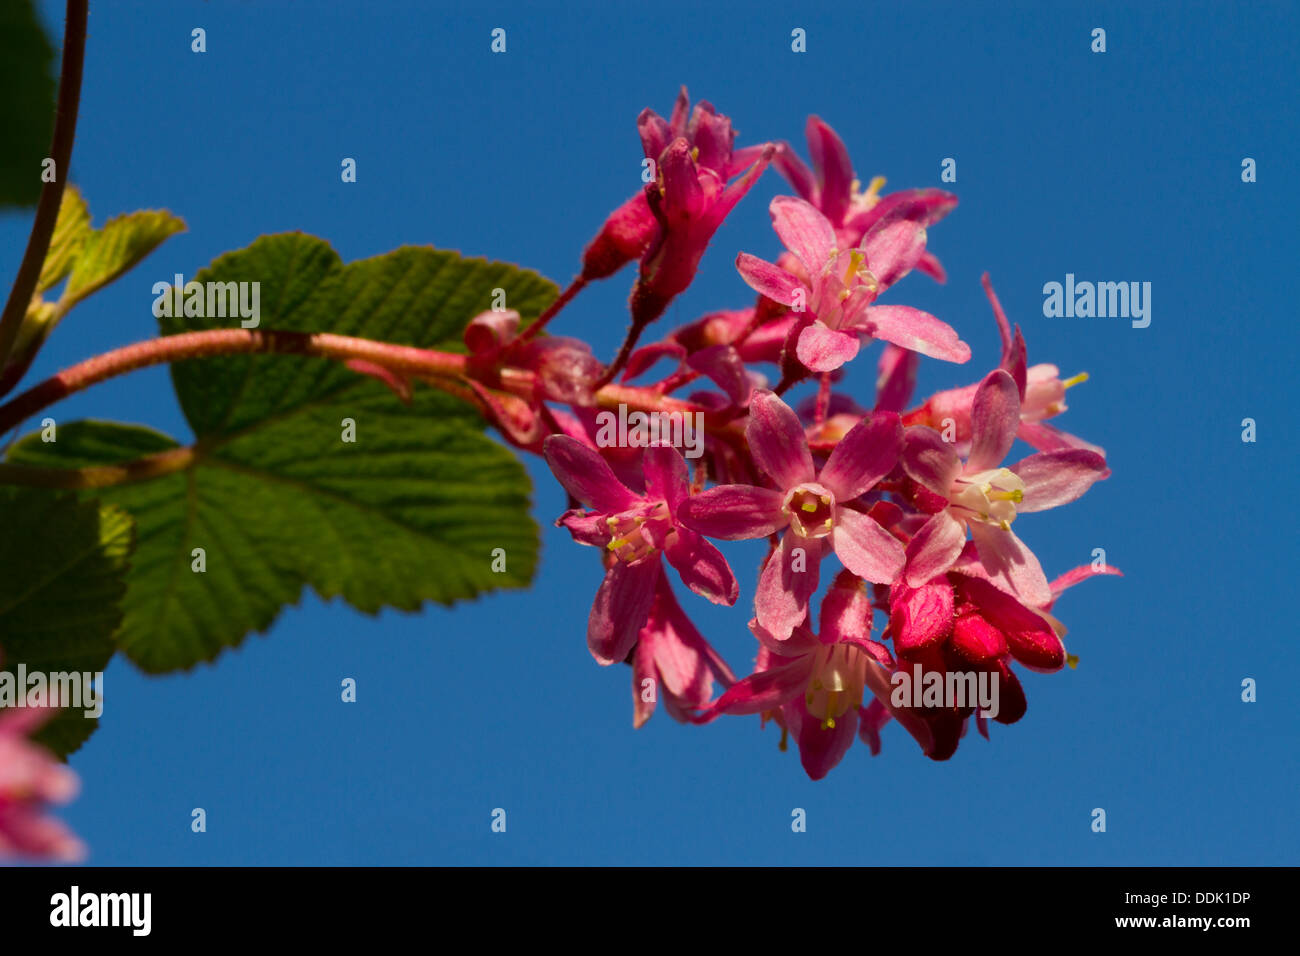 Flowers of Red-flowering Currant (Ribes sanguineum) against a blue sky. Garden Shrub. Stock Photo